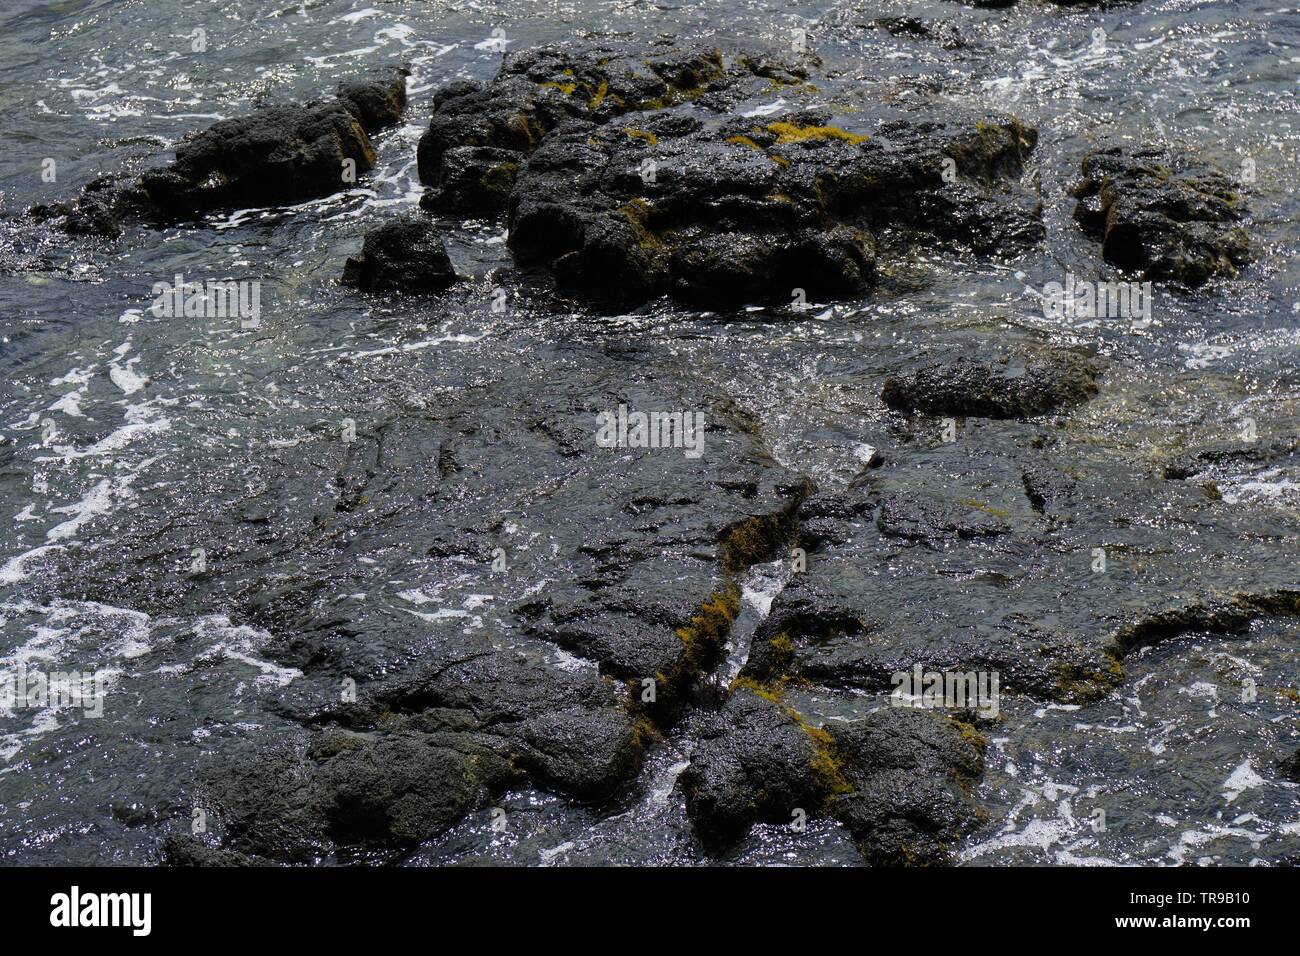 Beach scenes from beautiful Hilo Hawaii and the wide range of flora and lava rock Stock Photo